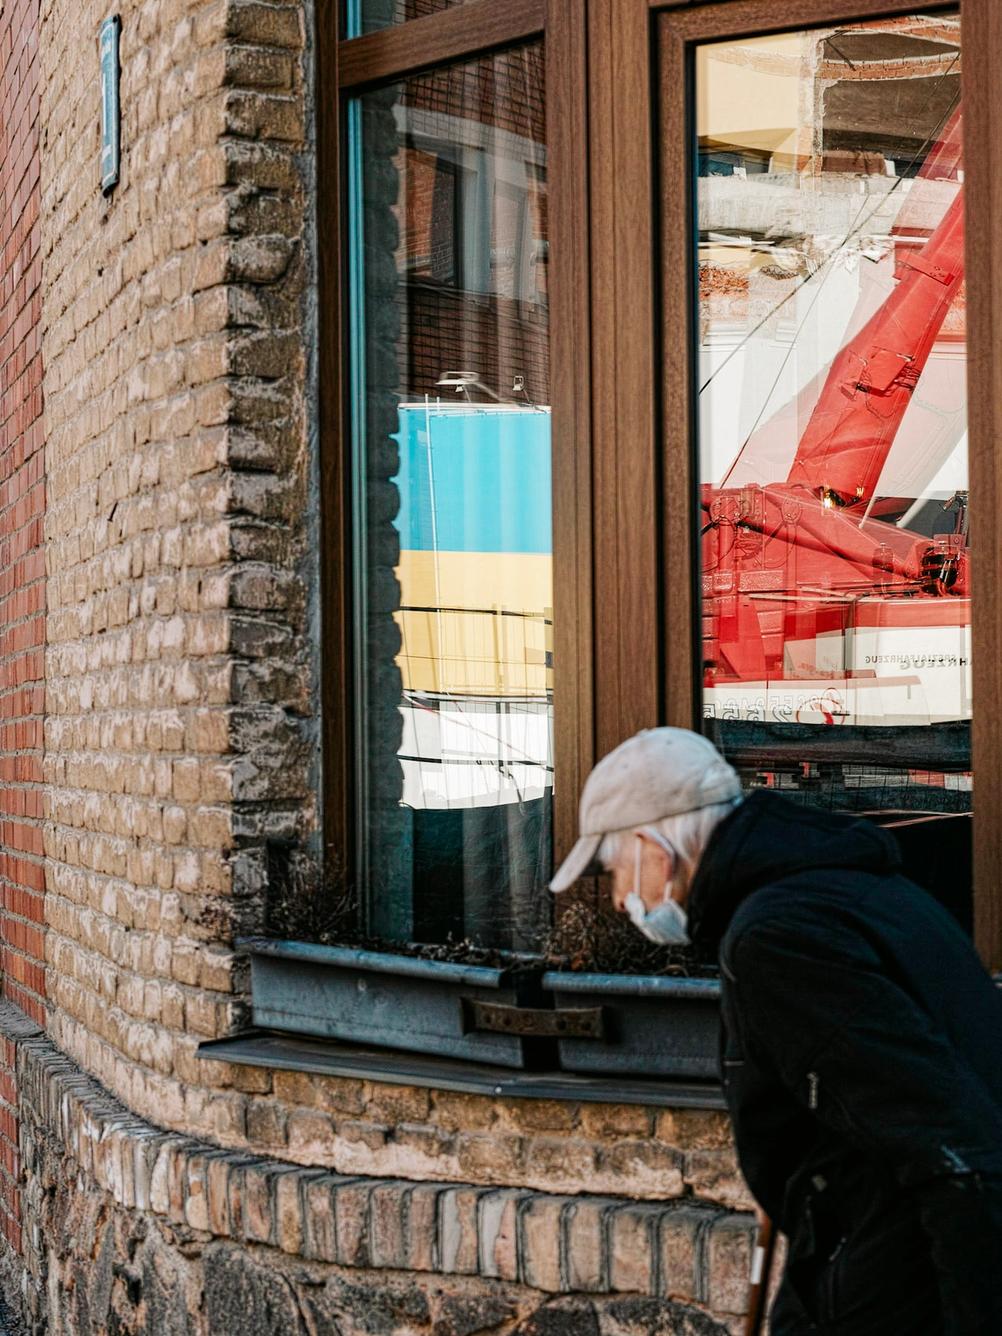 Photo of an old lady walking across a window containing reflection of an Ukrainian flag.